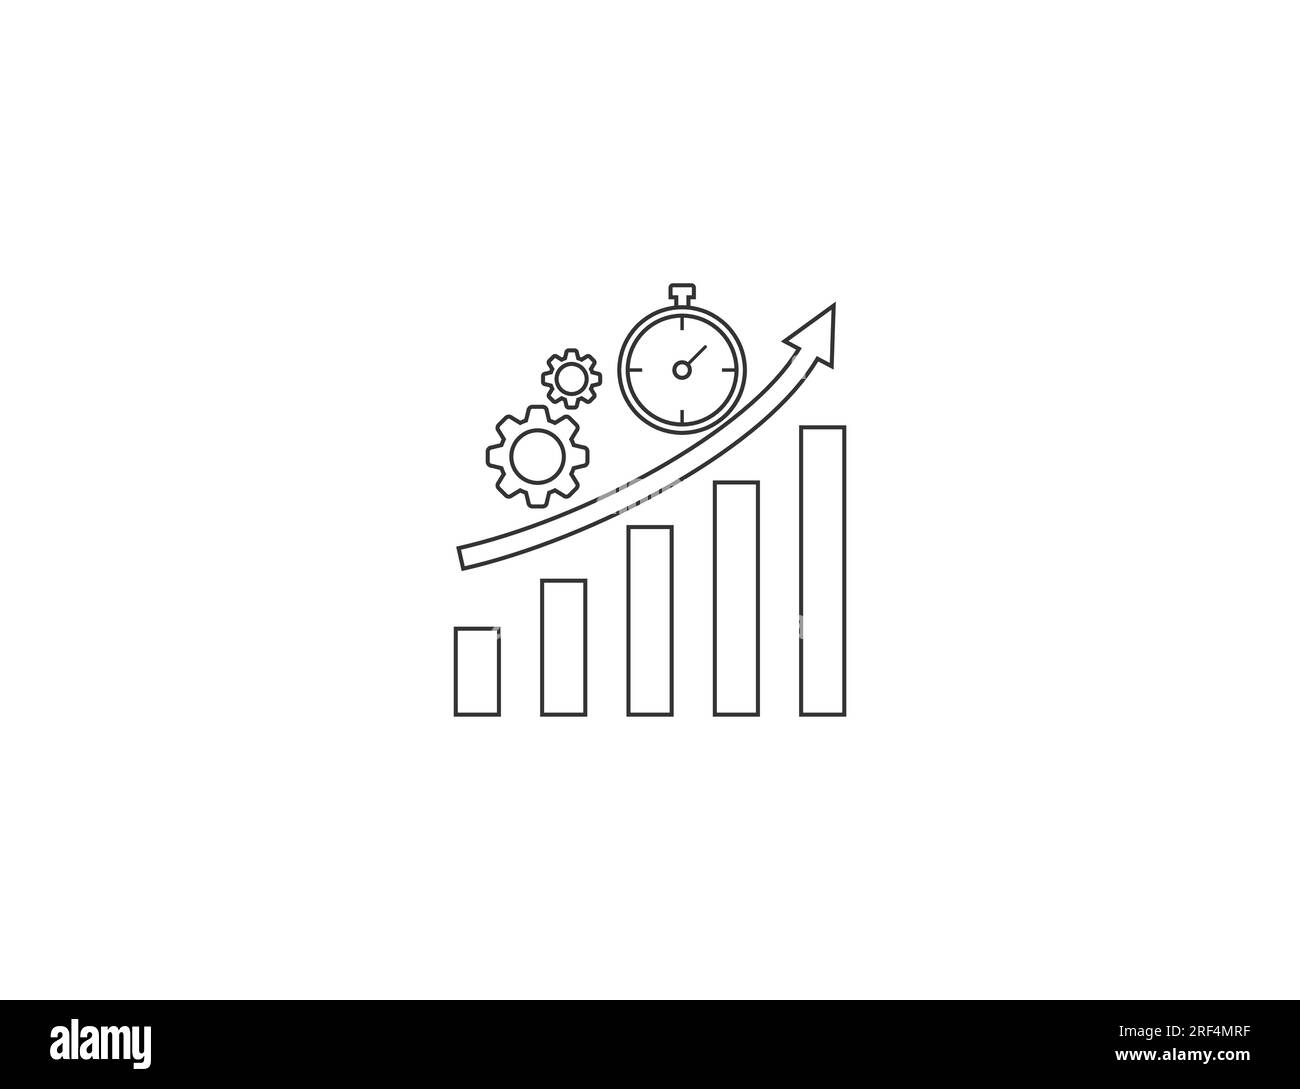 Efficiency, business, management icon. Vector illustration. Stock Vector